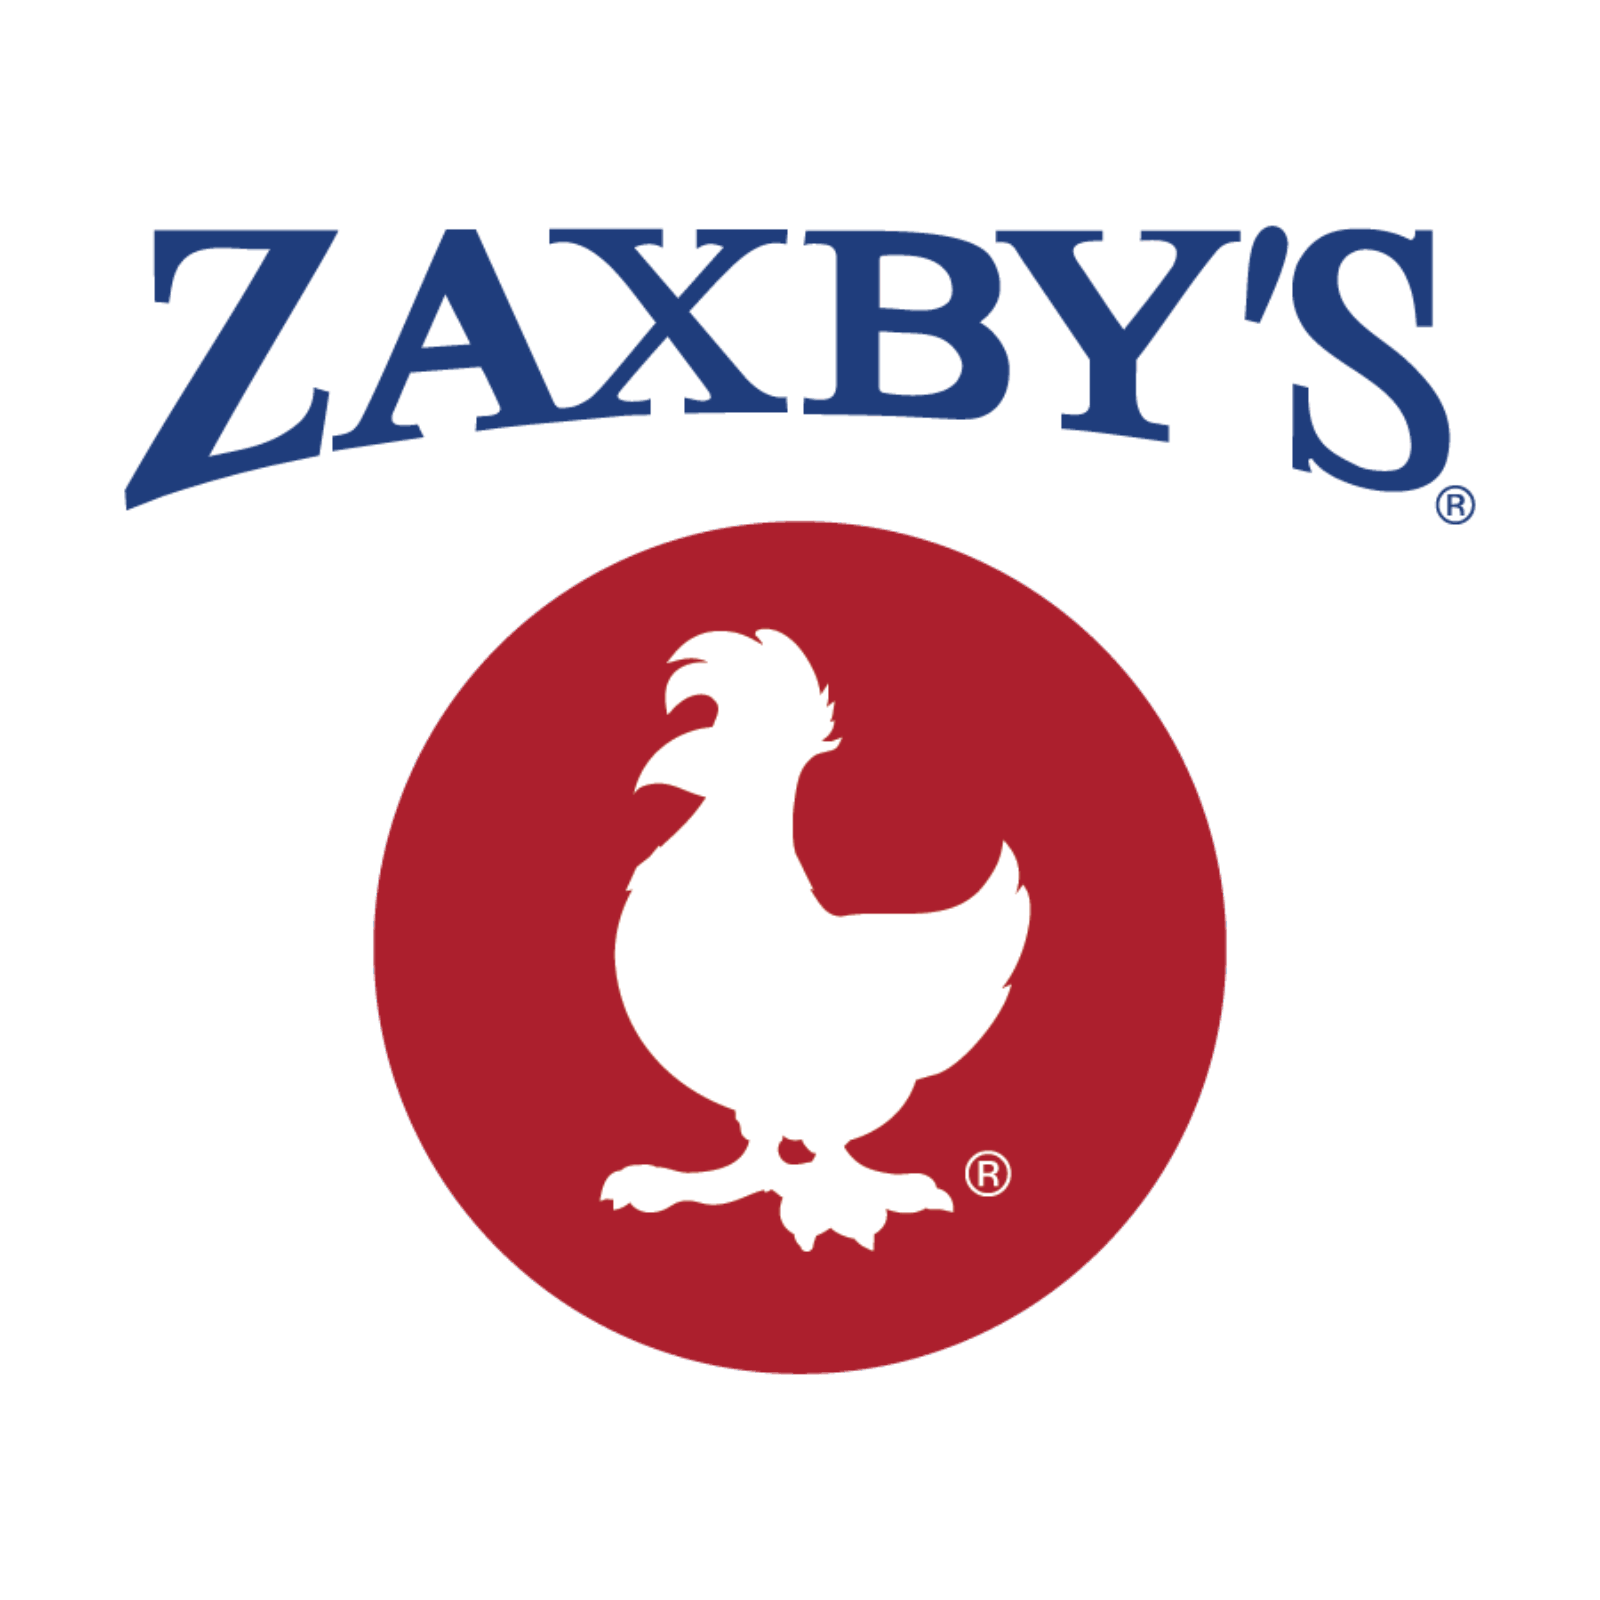 Zaxby's: A CrunchTime Success Story